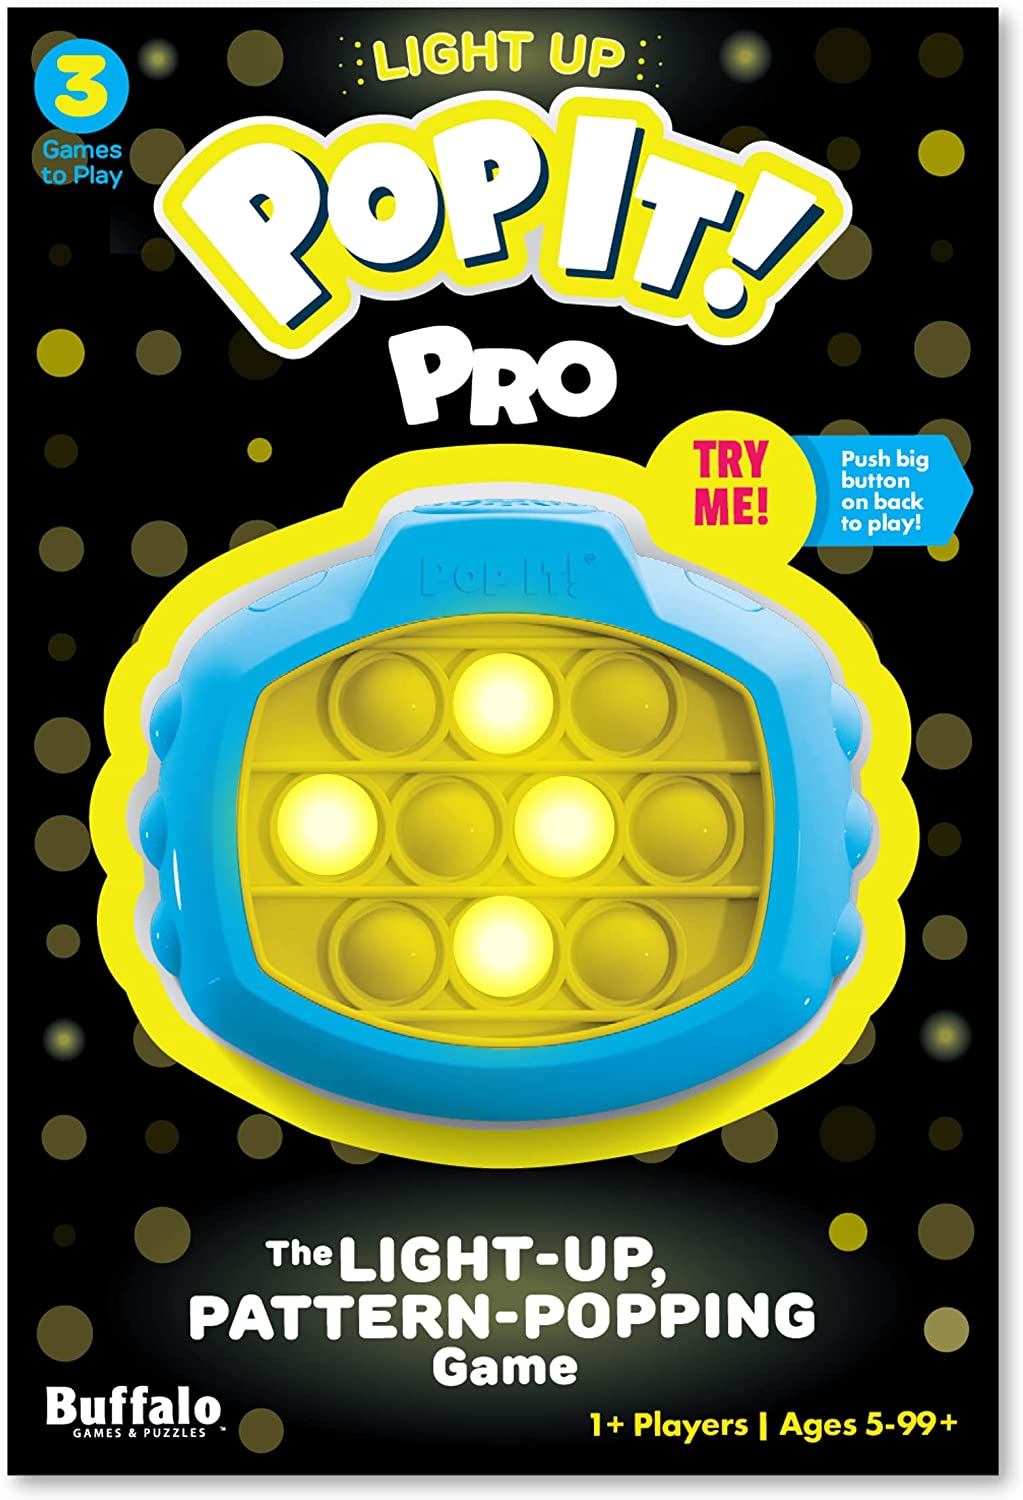 POP IT! GOES Electric! - The Addictive Bubble Popping Classic Meets Fast Fun Electronic Gaming! POP IT PRO is The Genuine Original Electronic Bubble Popping Game! | Patent Pending.